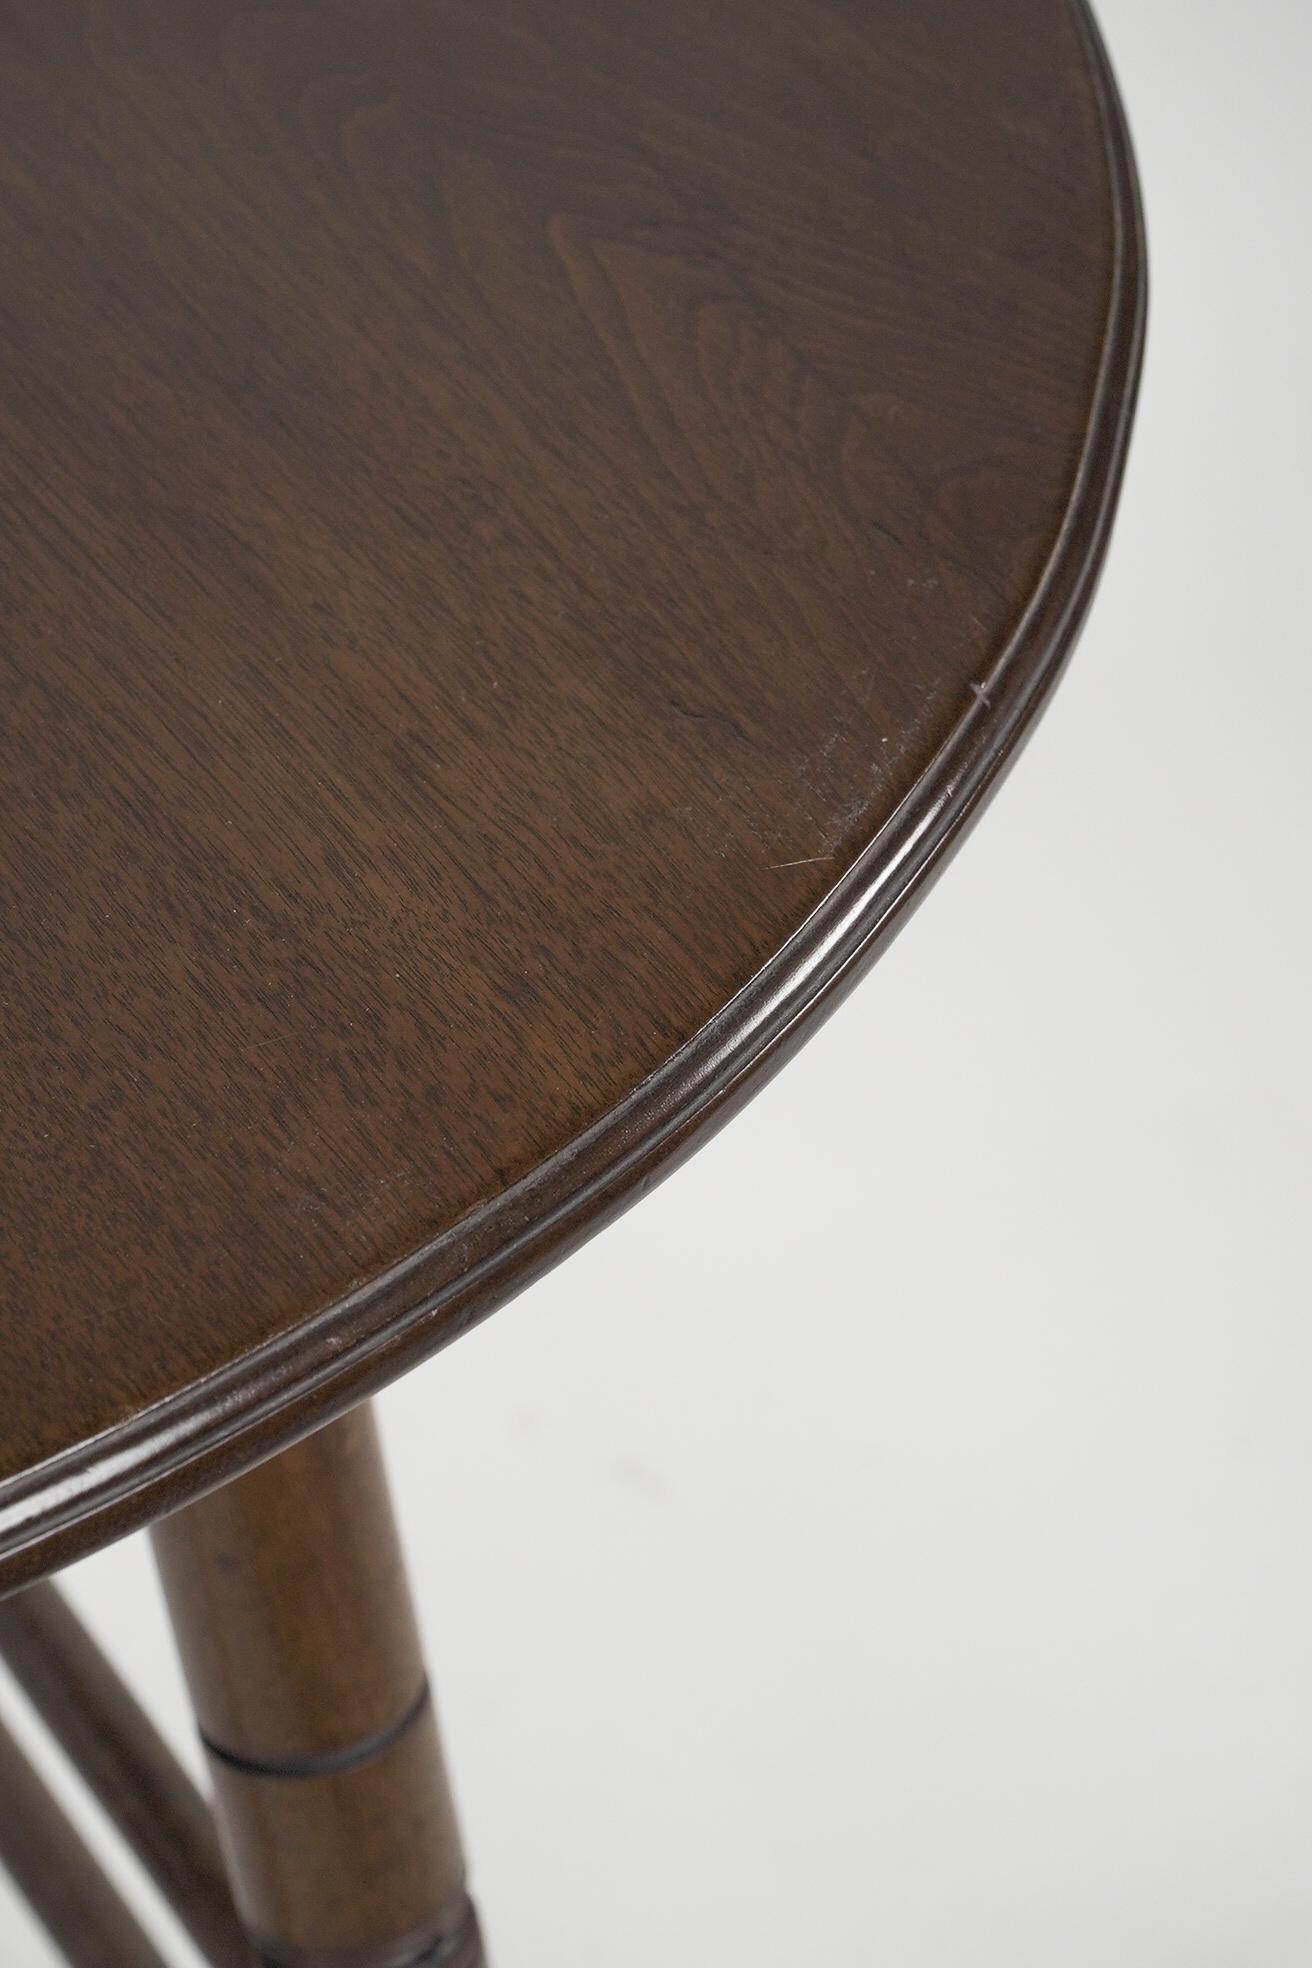 Aesthetic Movement Walnut centre table with incised circular details to the legs For Sale 1